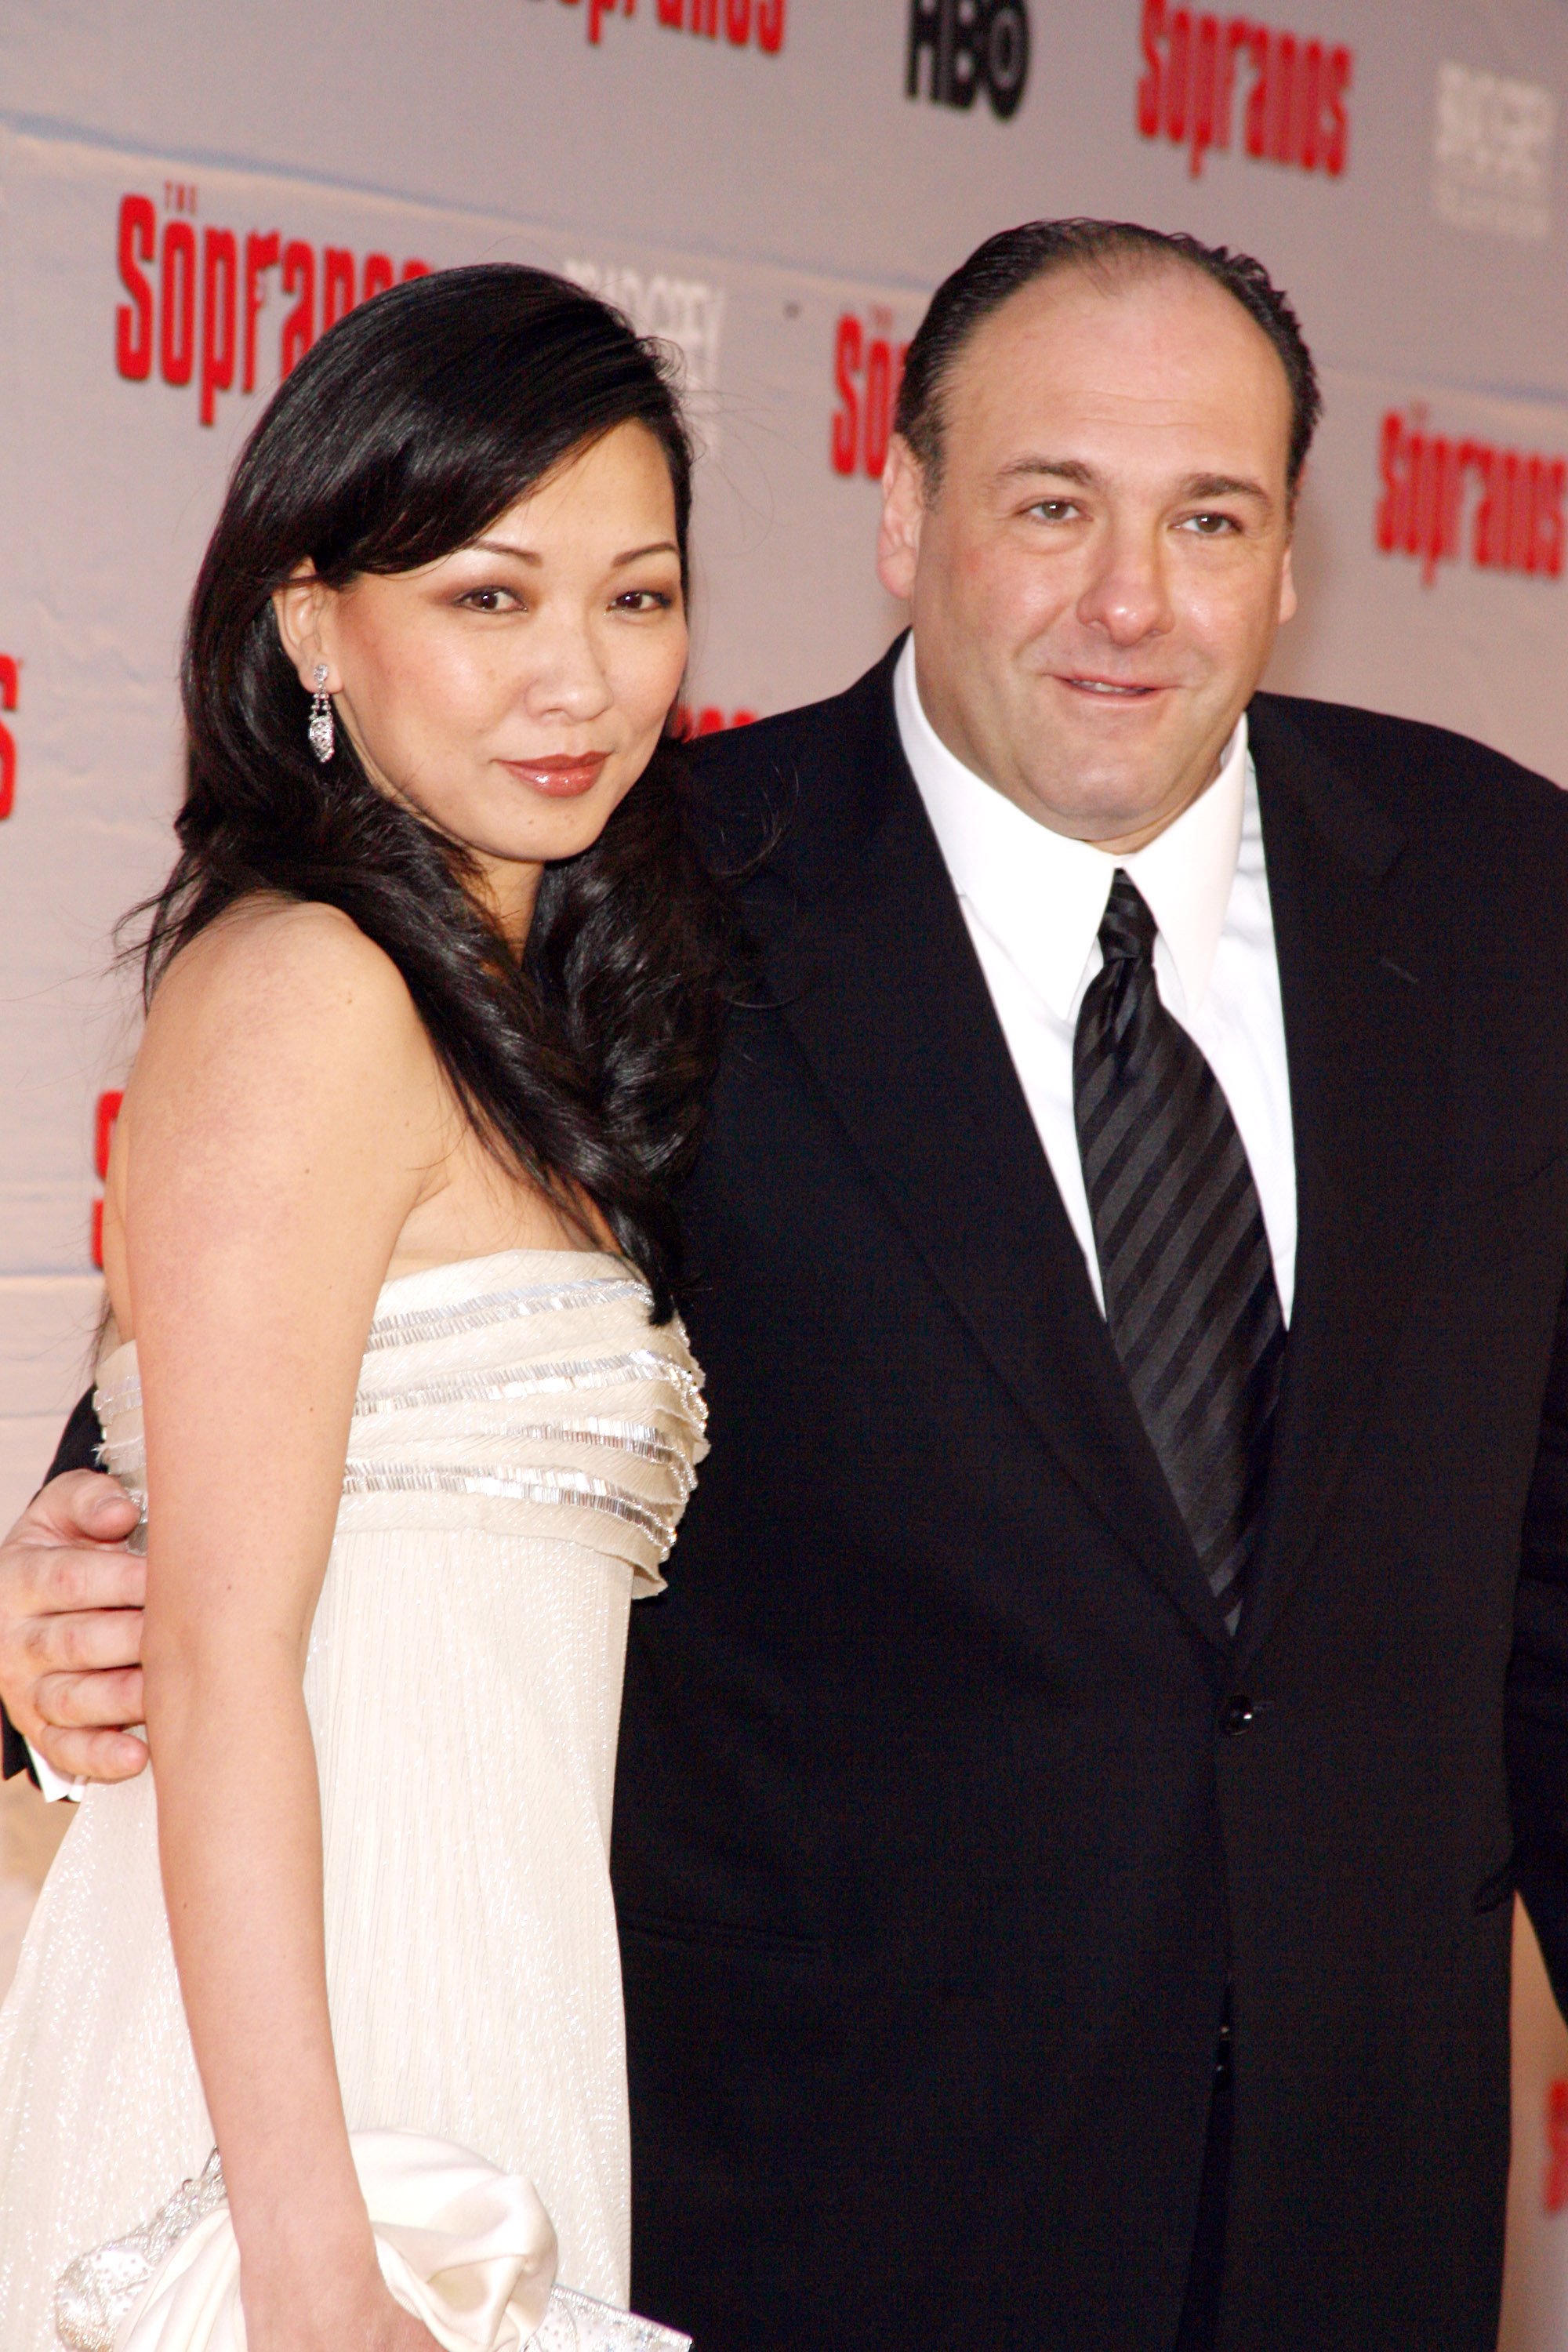 Deborah Lin and James Gandolfini attend "The Sopranos" Final Season World Premiere at Radio City Music Hall on March 27, 2007, in New York City, New York. | Source: Getty Images